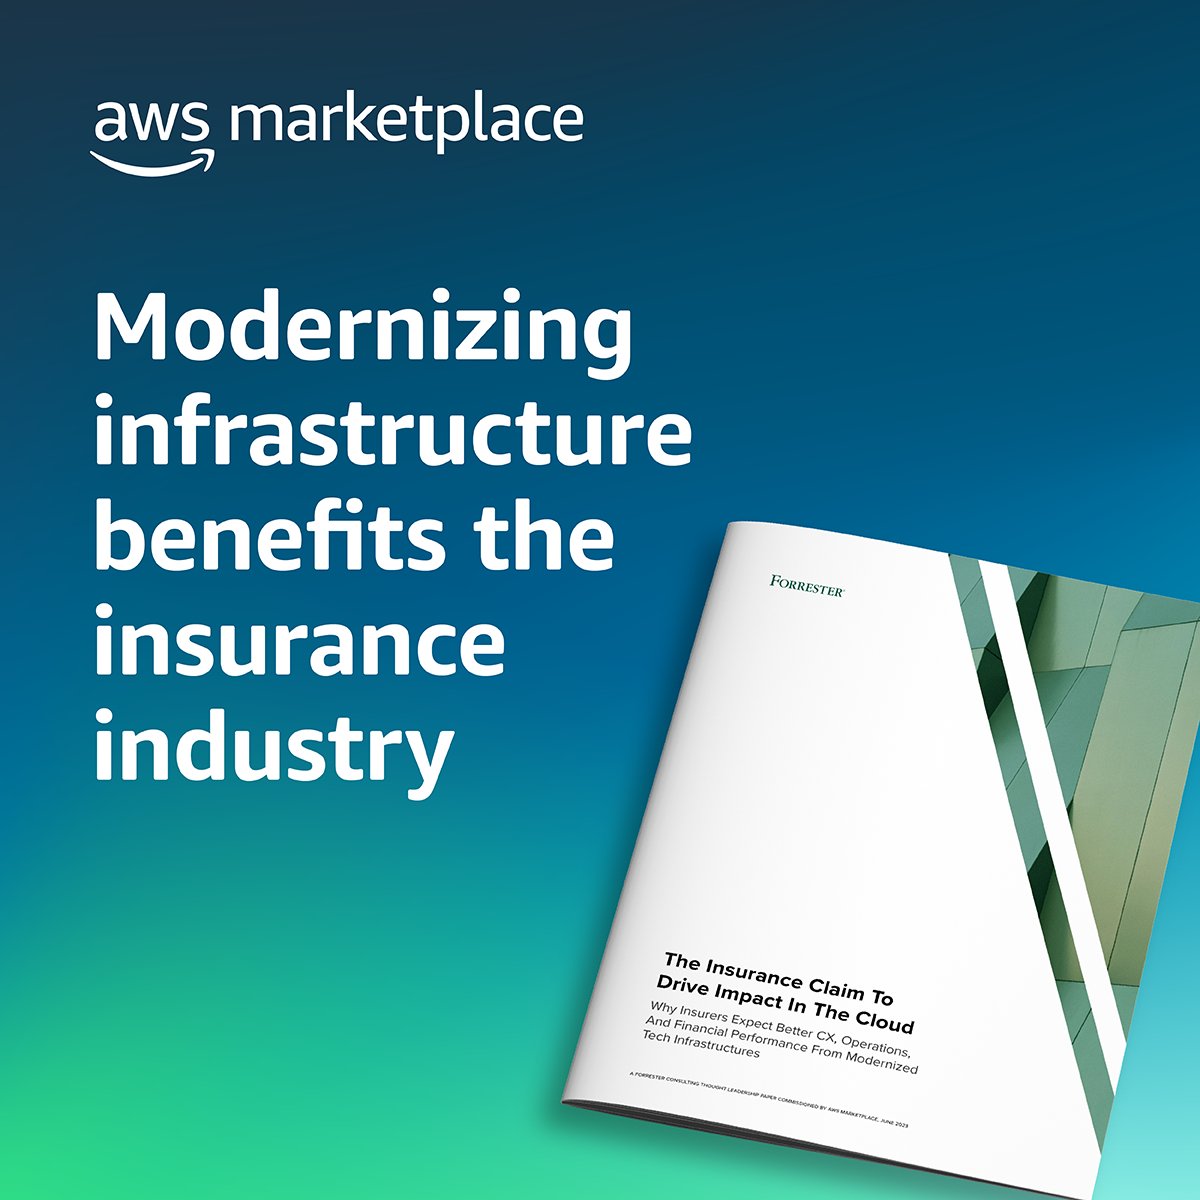 #Insurance providers—are you meeting your customers’ expectations? Read how modernizing core applications can make all the difference. Download now: go.aws/4bU48uI